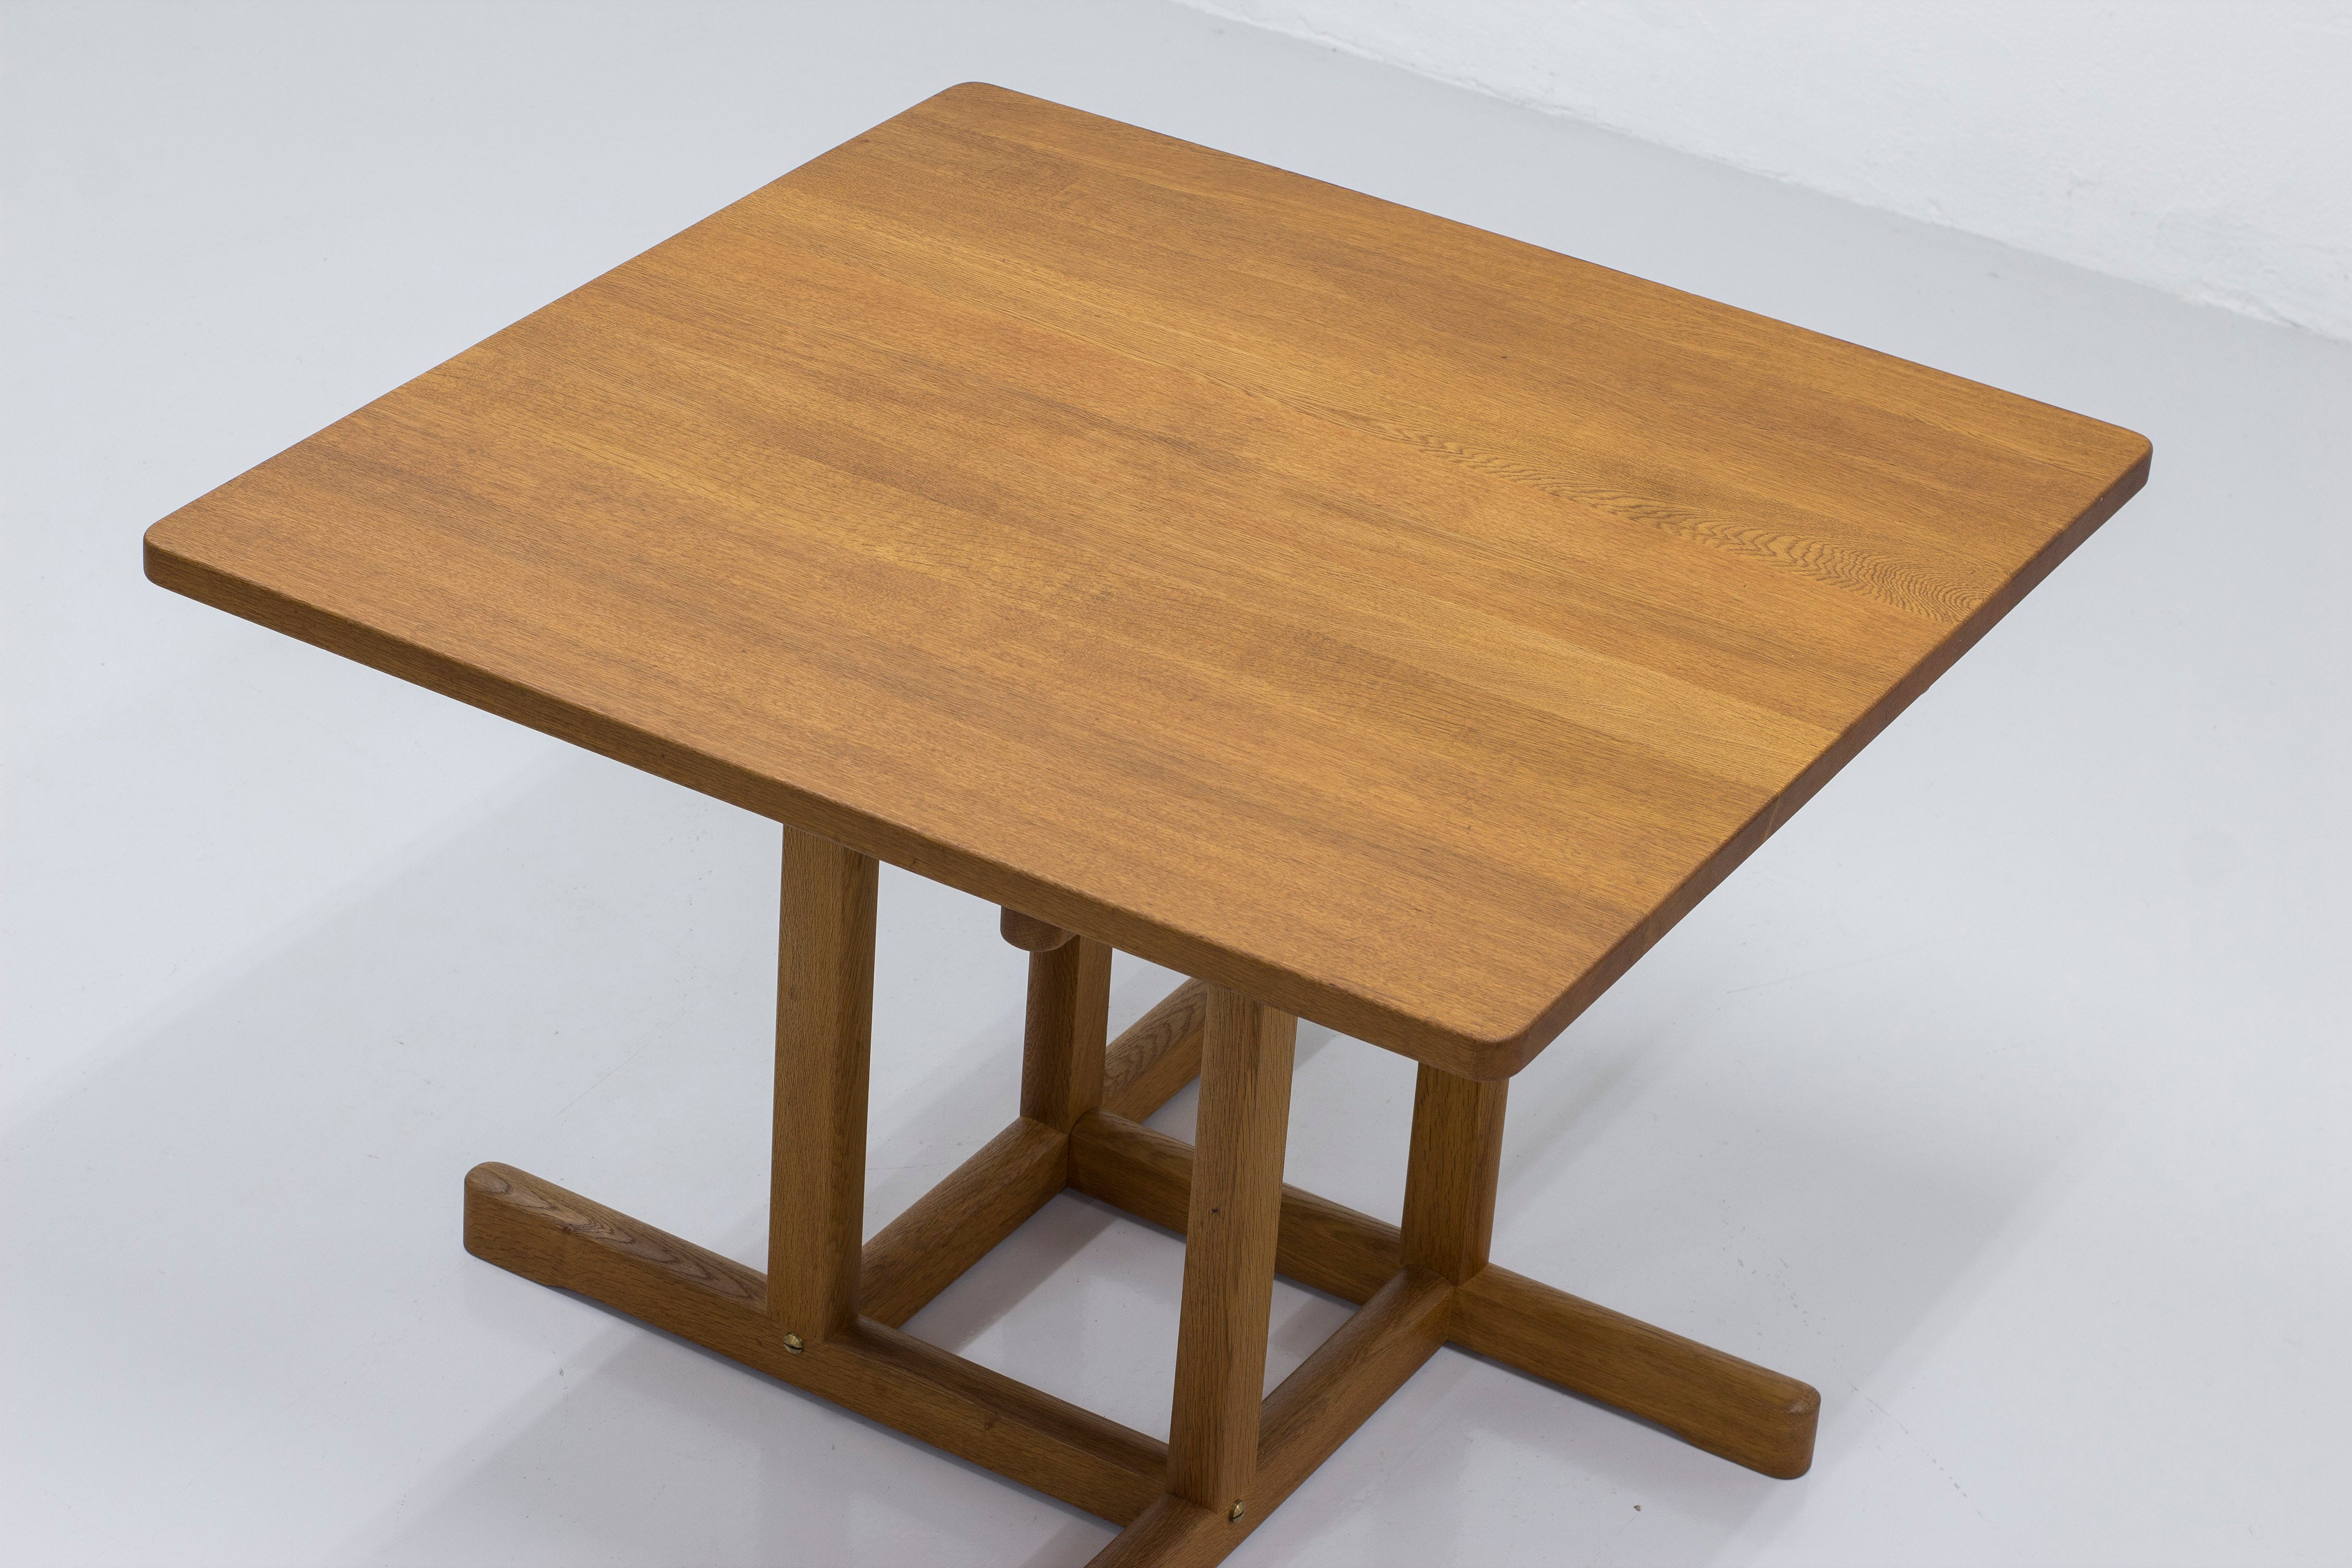 Dining table 6288 by Mogensen